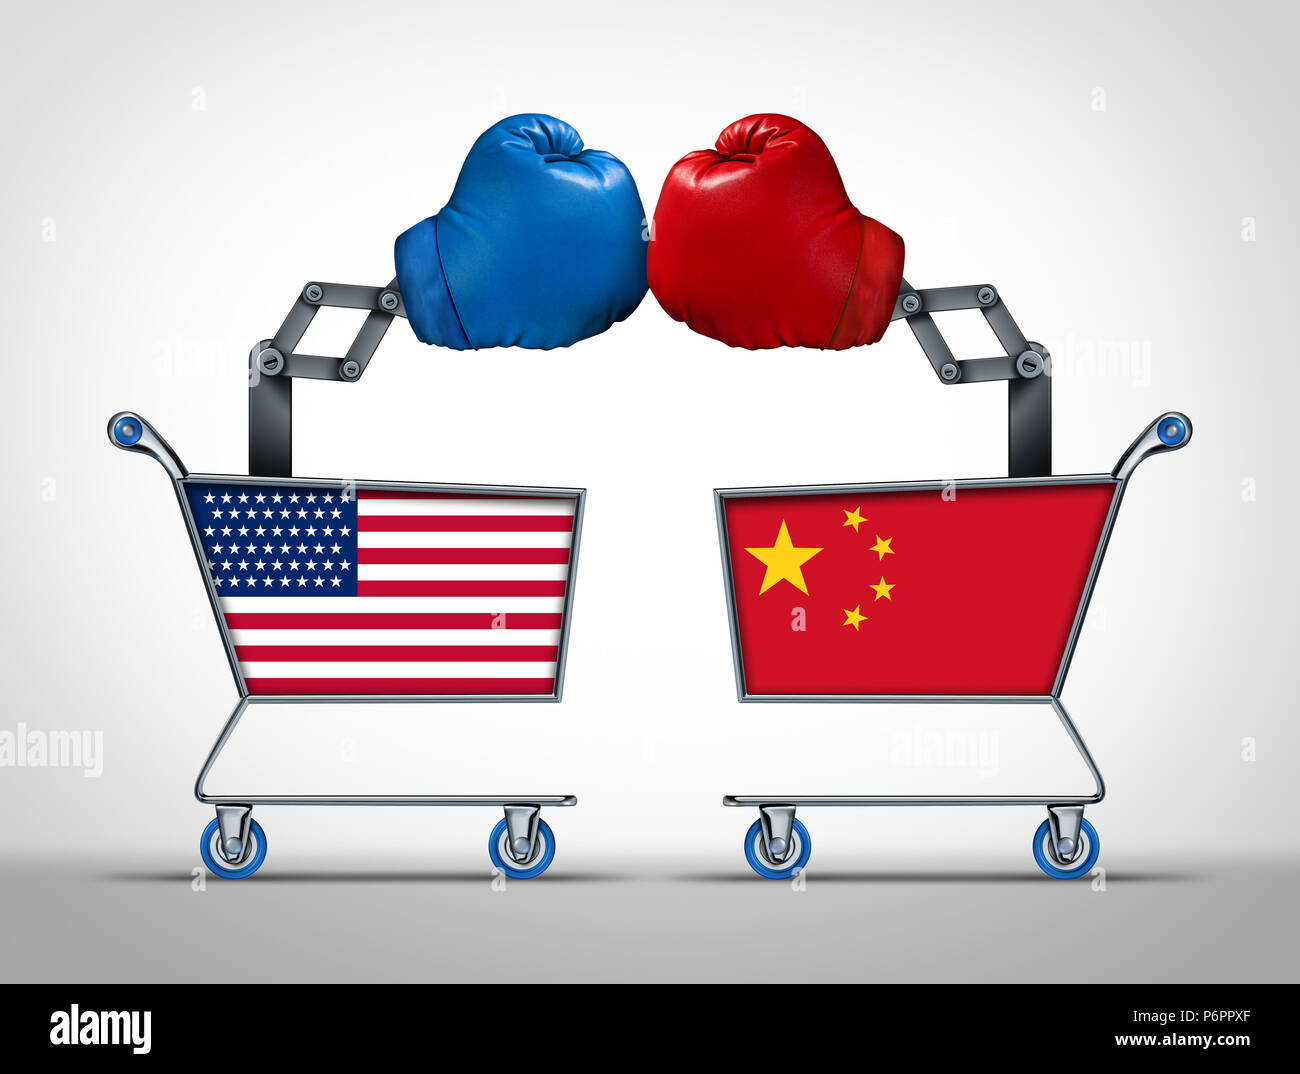 United States and China trade war and economic tariff dispute and financial market negotiation between the American and Chinese governments. Stock Photo